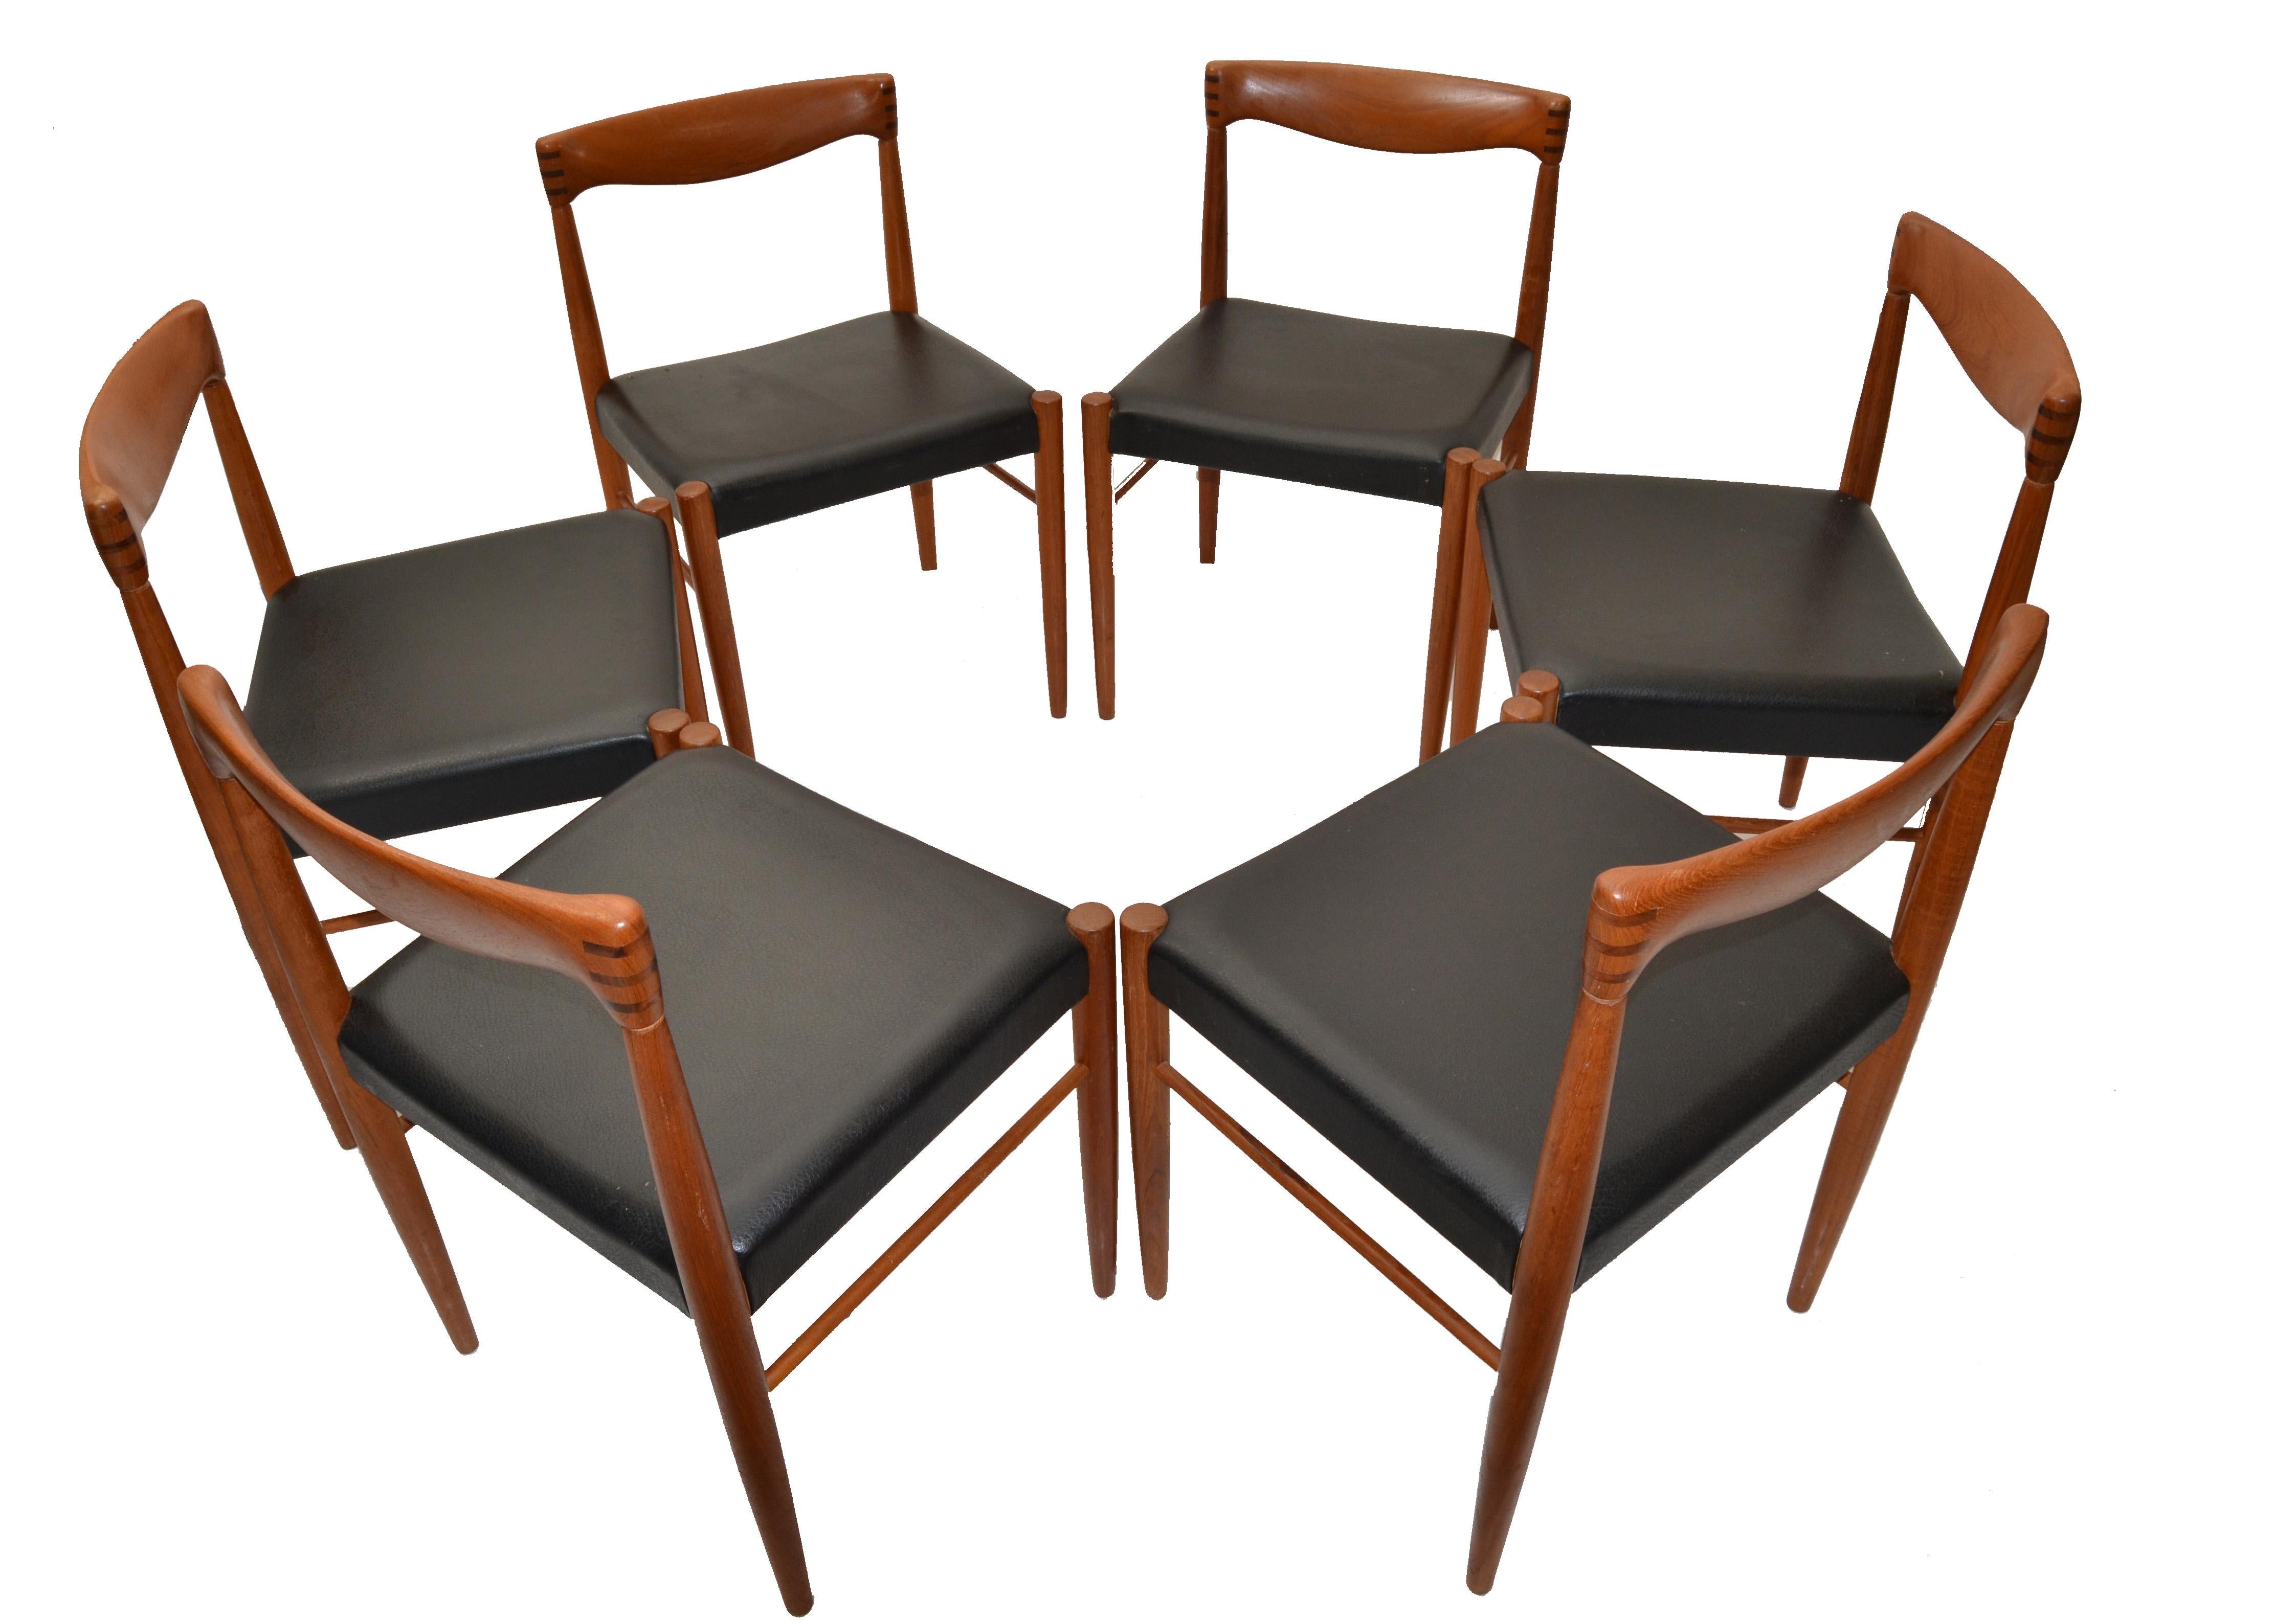 Scandinavian Modern Set of six Henry Walter Klein dining chairs in teak with rosewood inlays and black faux leather Seats.
Manufactured during the 1960 at Bramin Møbler in Denmark. Skillfully crafted in solid teak and rosewood has their own